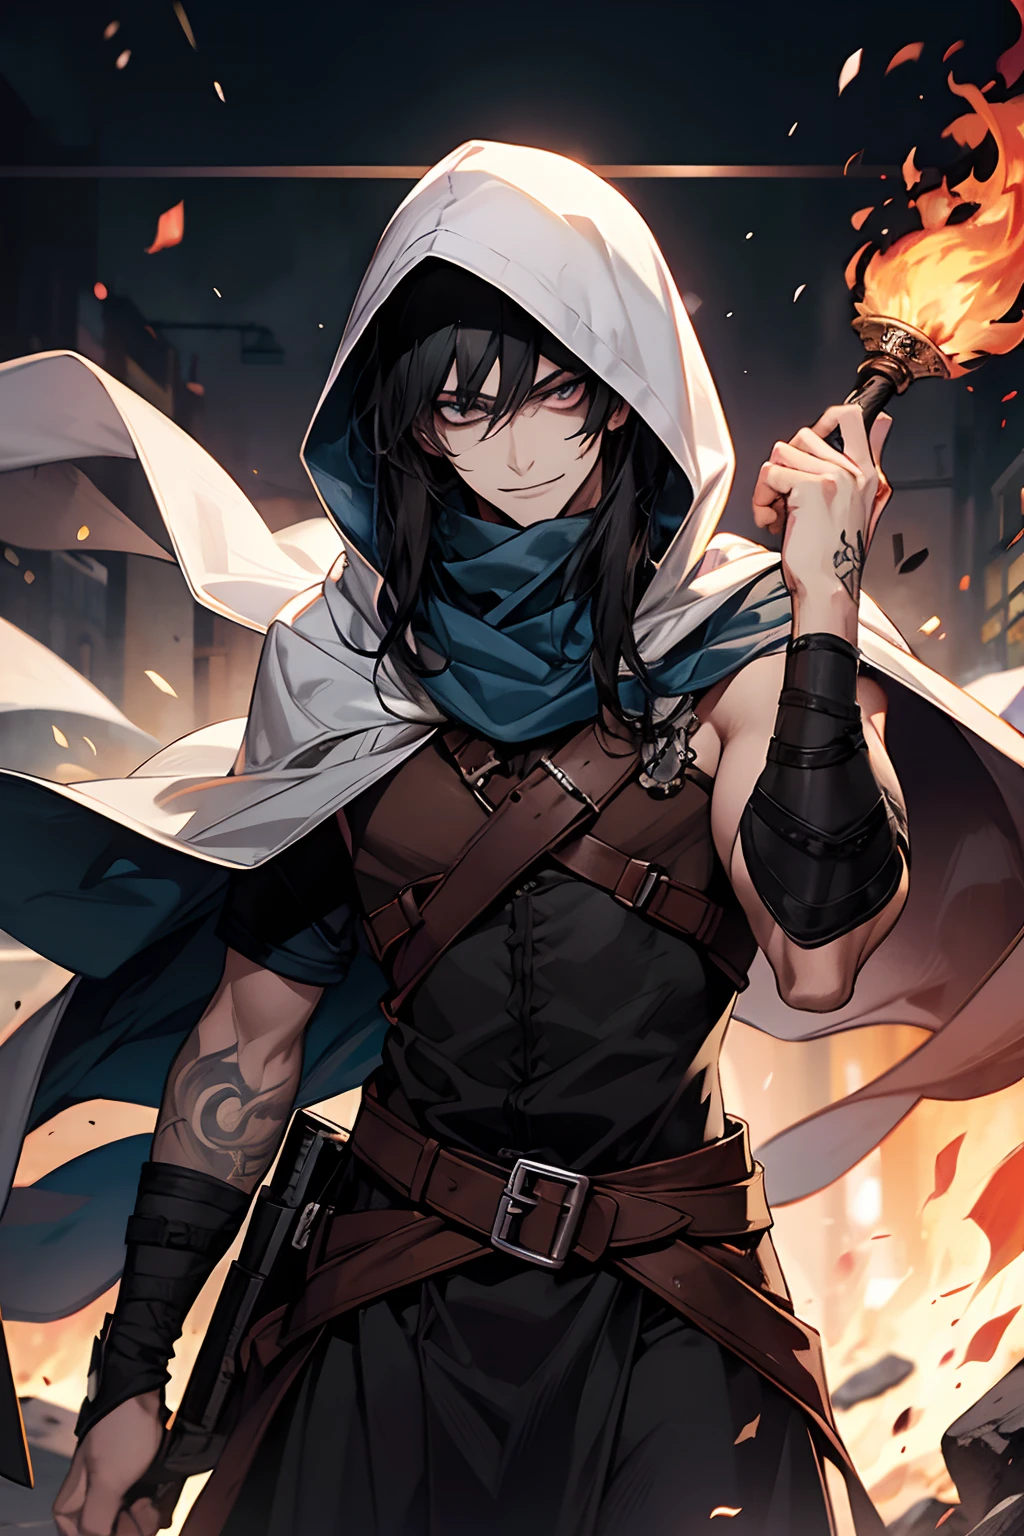 male, adult,medium long length hair with bangs, black hair, blue-grey eyes, beautiful, rogue, wielding fire magic, tattoos, bare arms , hooded scarf, medieval, crazy smirk